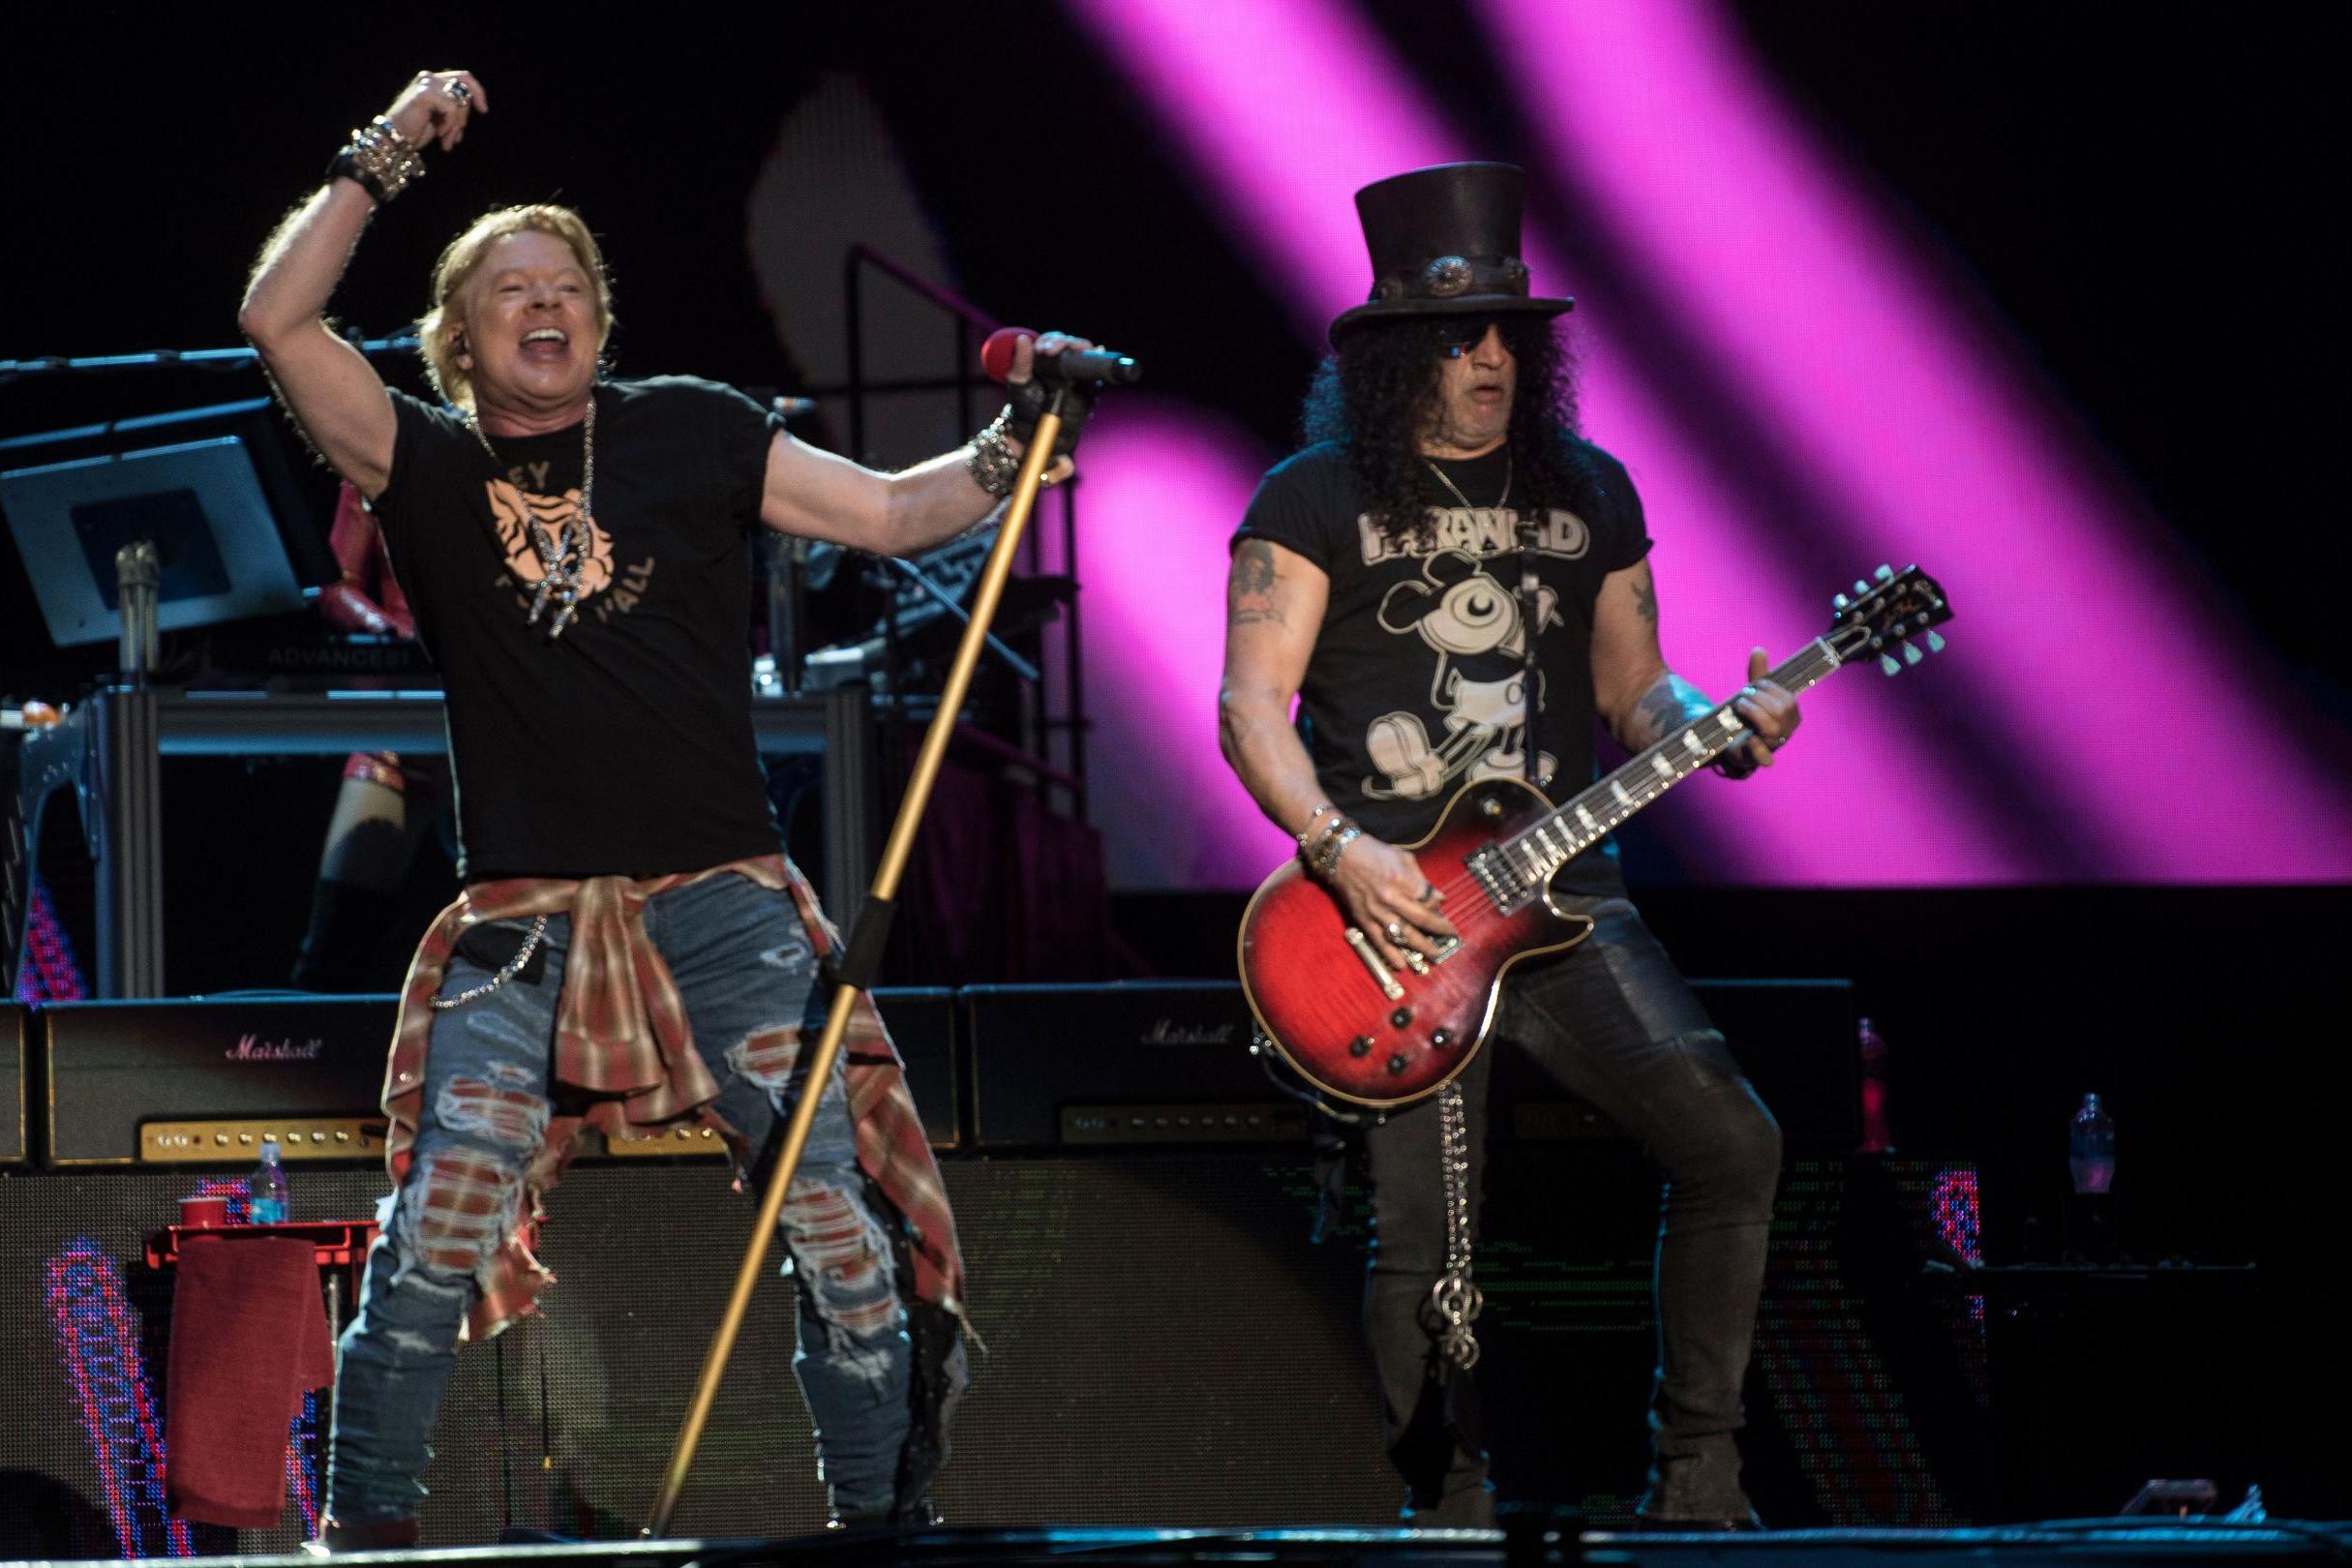 Axl Rose and Slash of the Guns N' Roses perform during the Vive Latino festival in Mexico City on 14 March 2020.